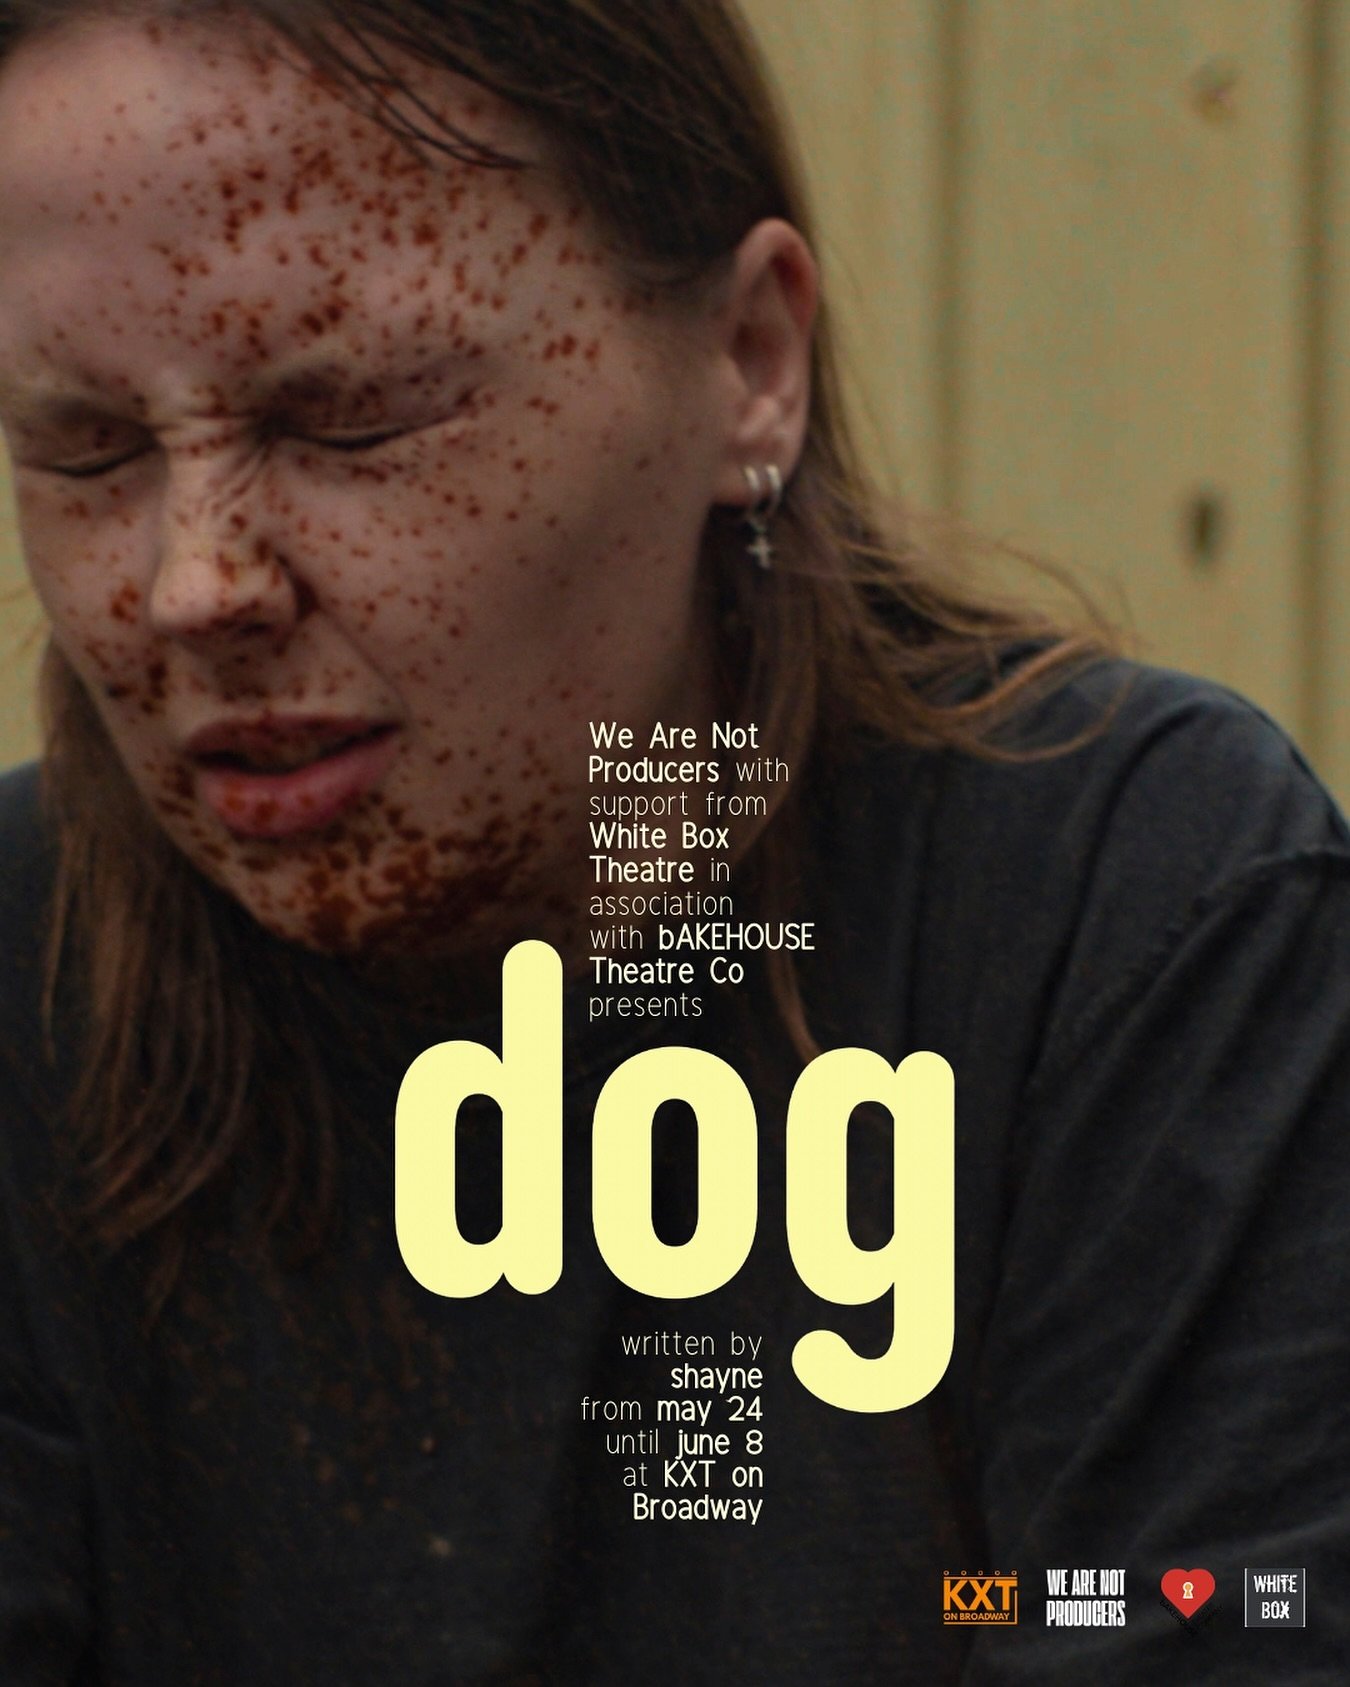 Our friends are presenting&nbsp;dog&nbsp;by Shayne&mdash;  A mental health play&nbsp;at&nbsp;KXT on Broadway in Sydney, May 24th until June 8th. The play explores the lived experience of Contamination Obsessive Compulsive Disorder (OCD) and alcohol a